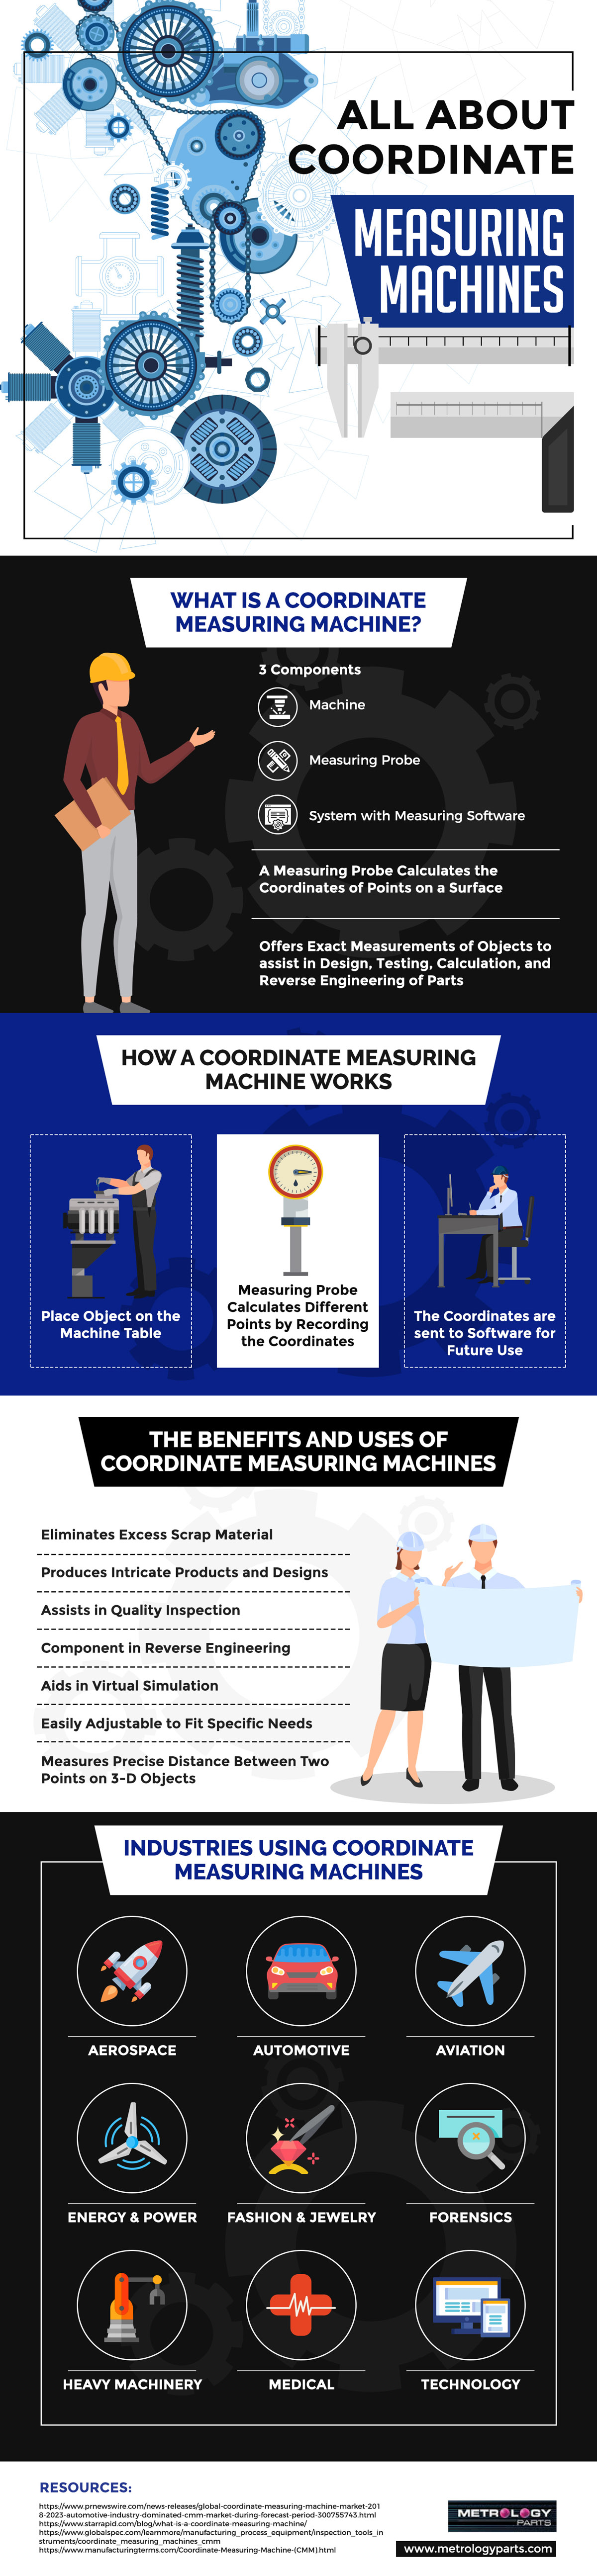 All About Coordinate Measuring Machines